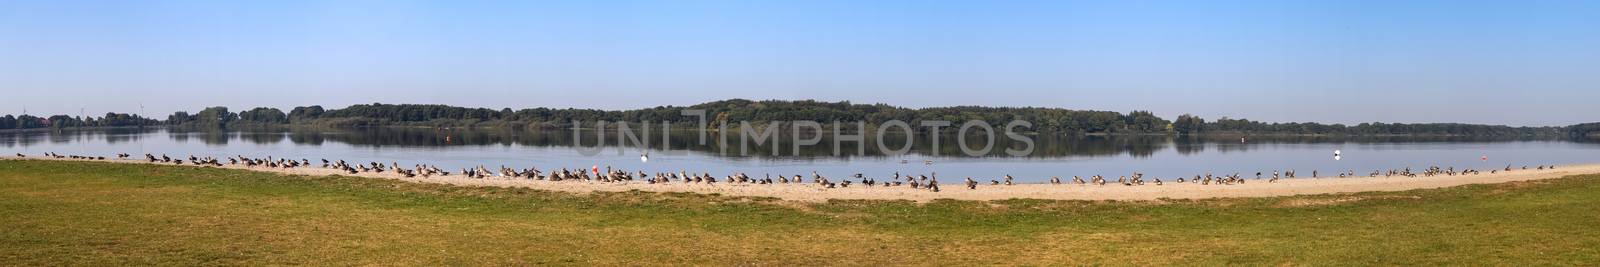 Lots of beautiful european goose birds at a lake on a sunny day by MP_foto71